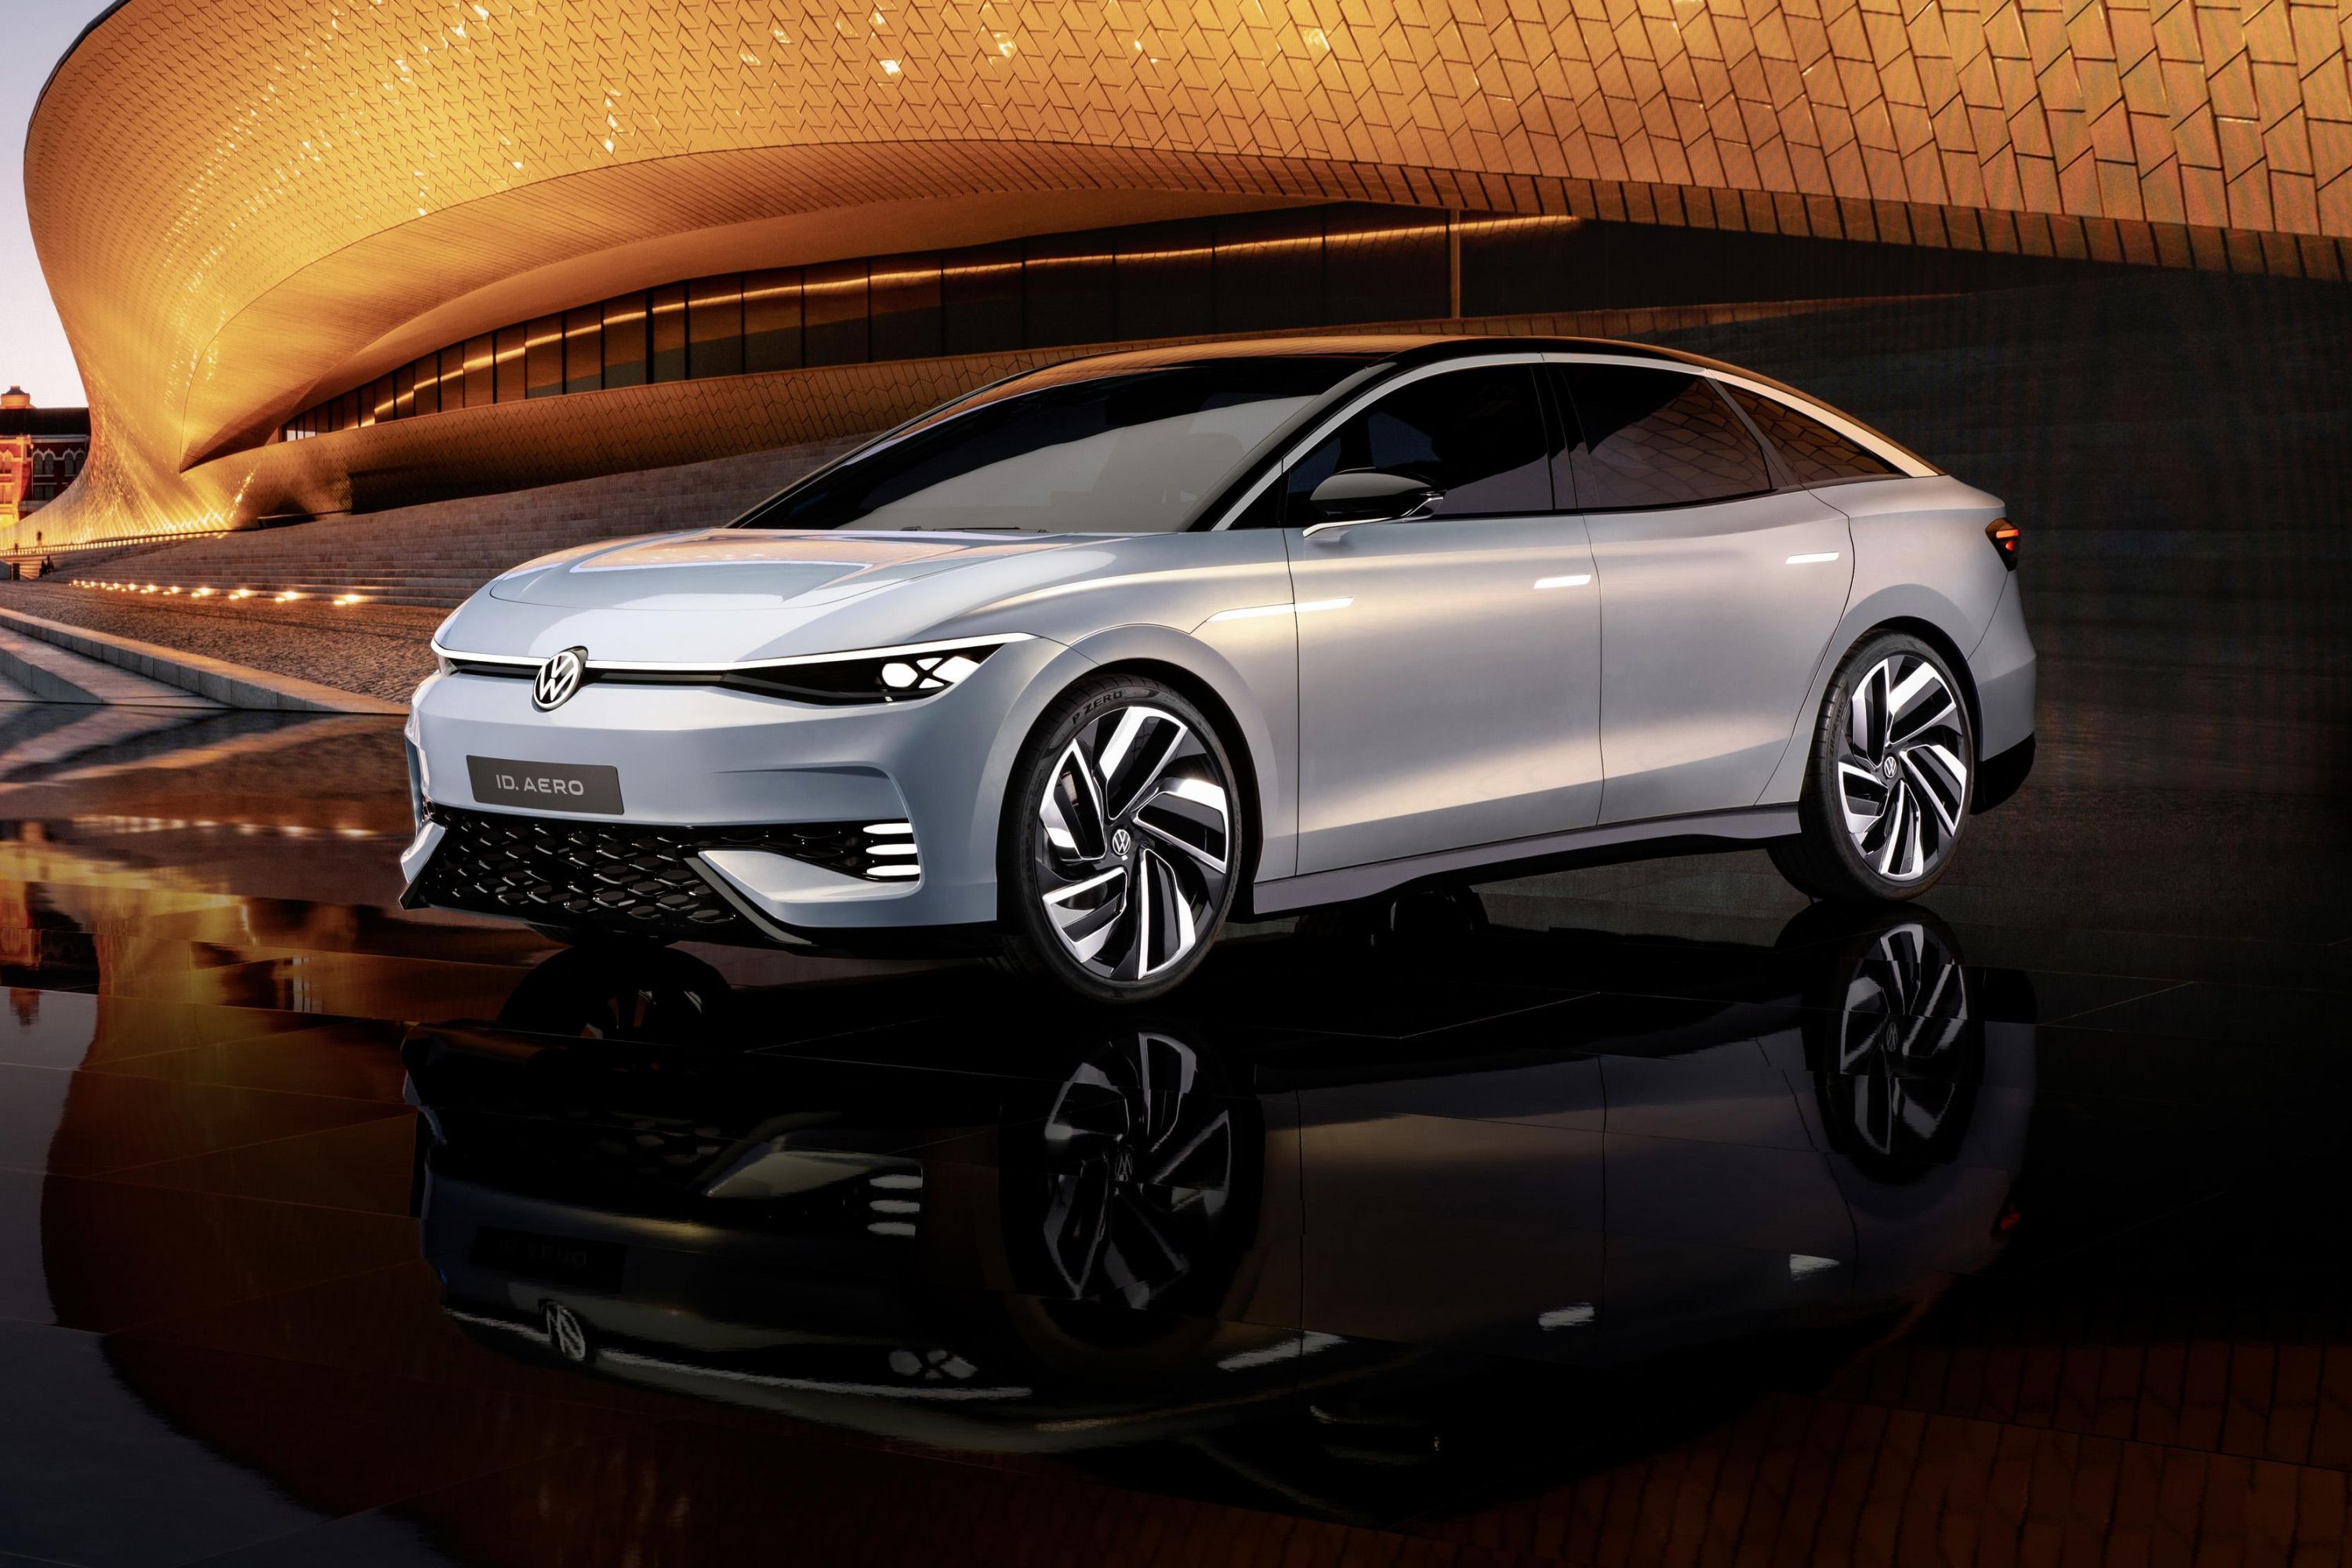 What electric cars does Volkswagen have coming? Joe Gordon Car Guy